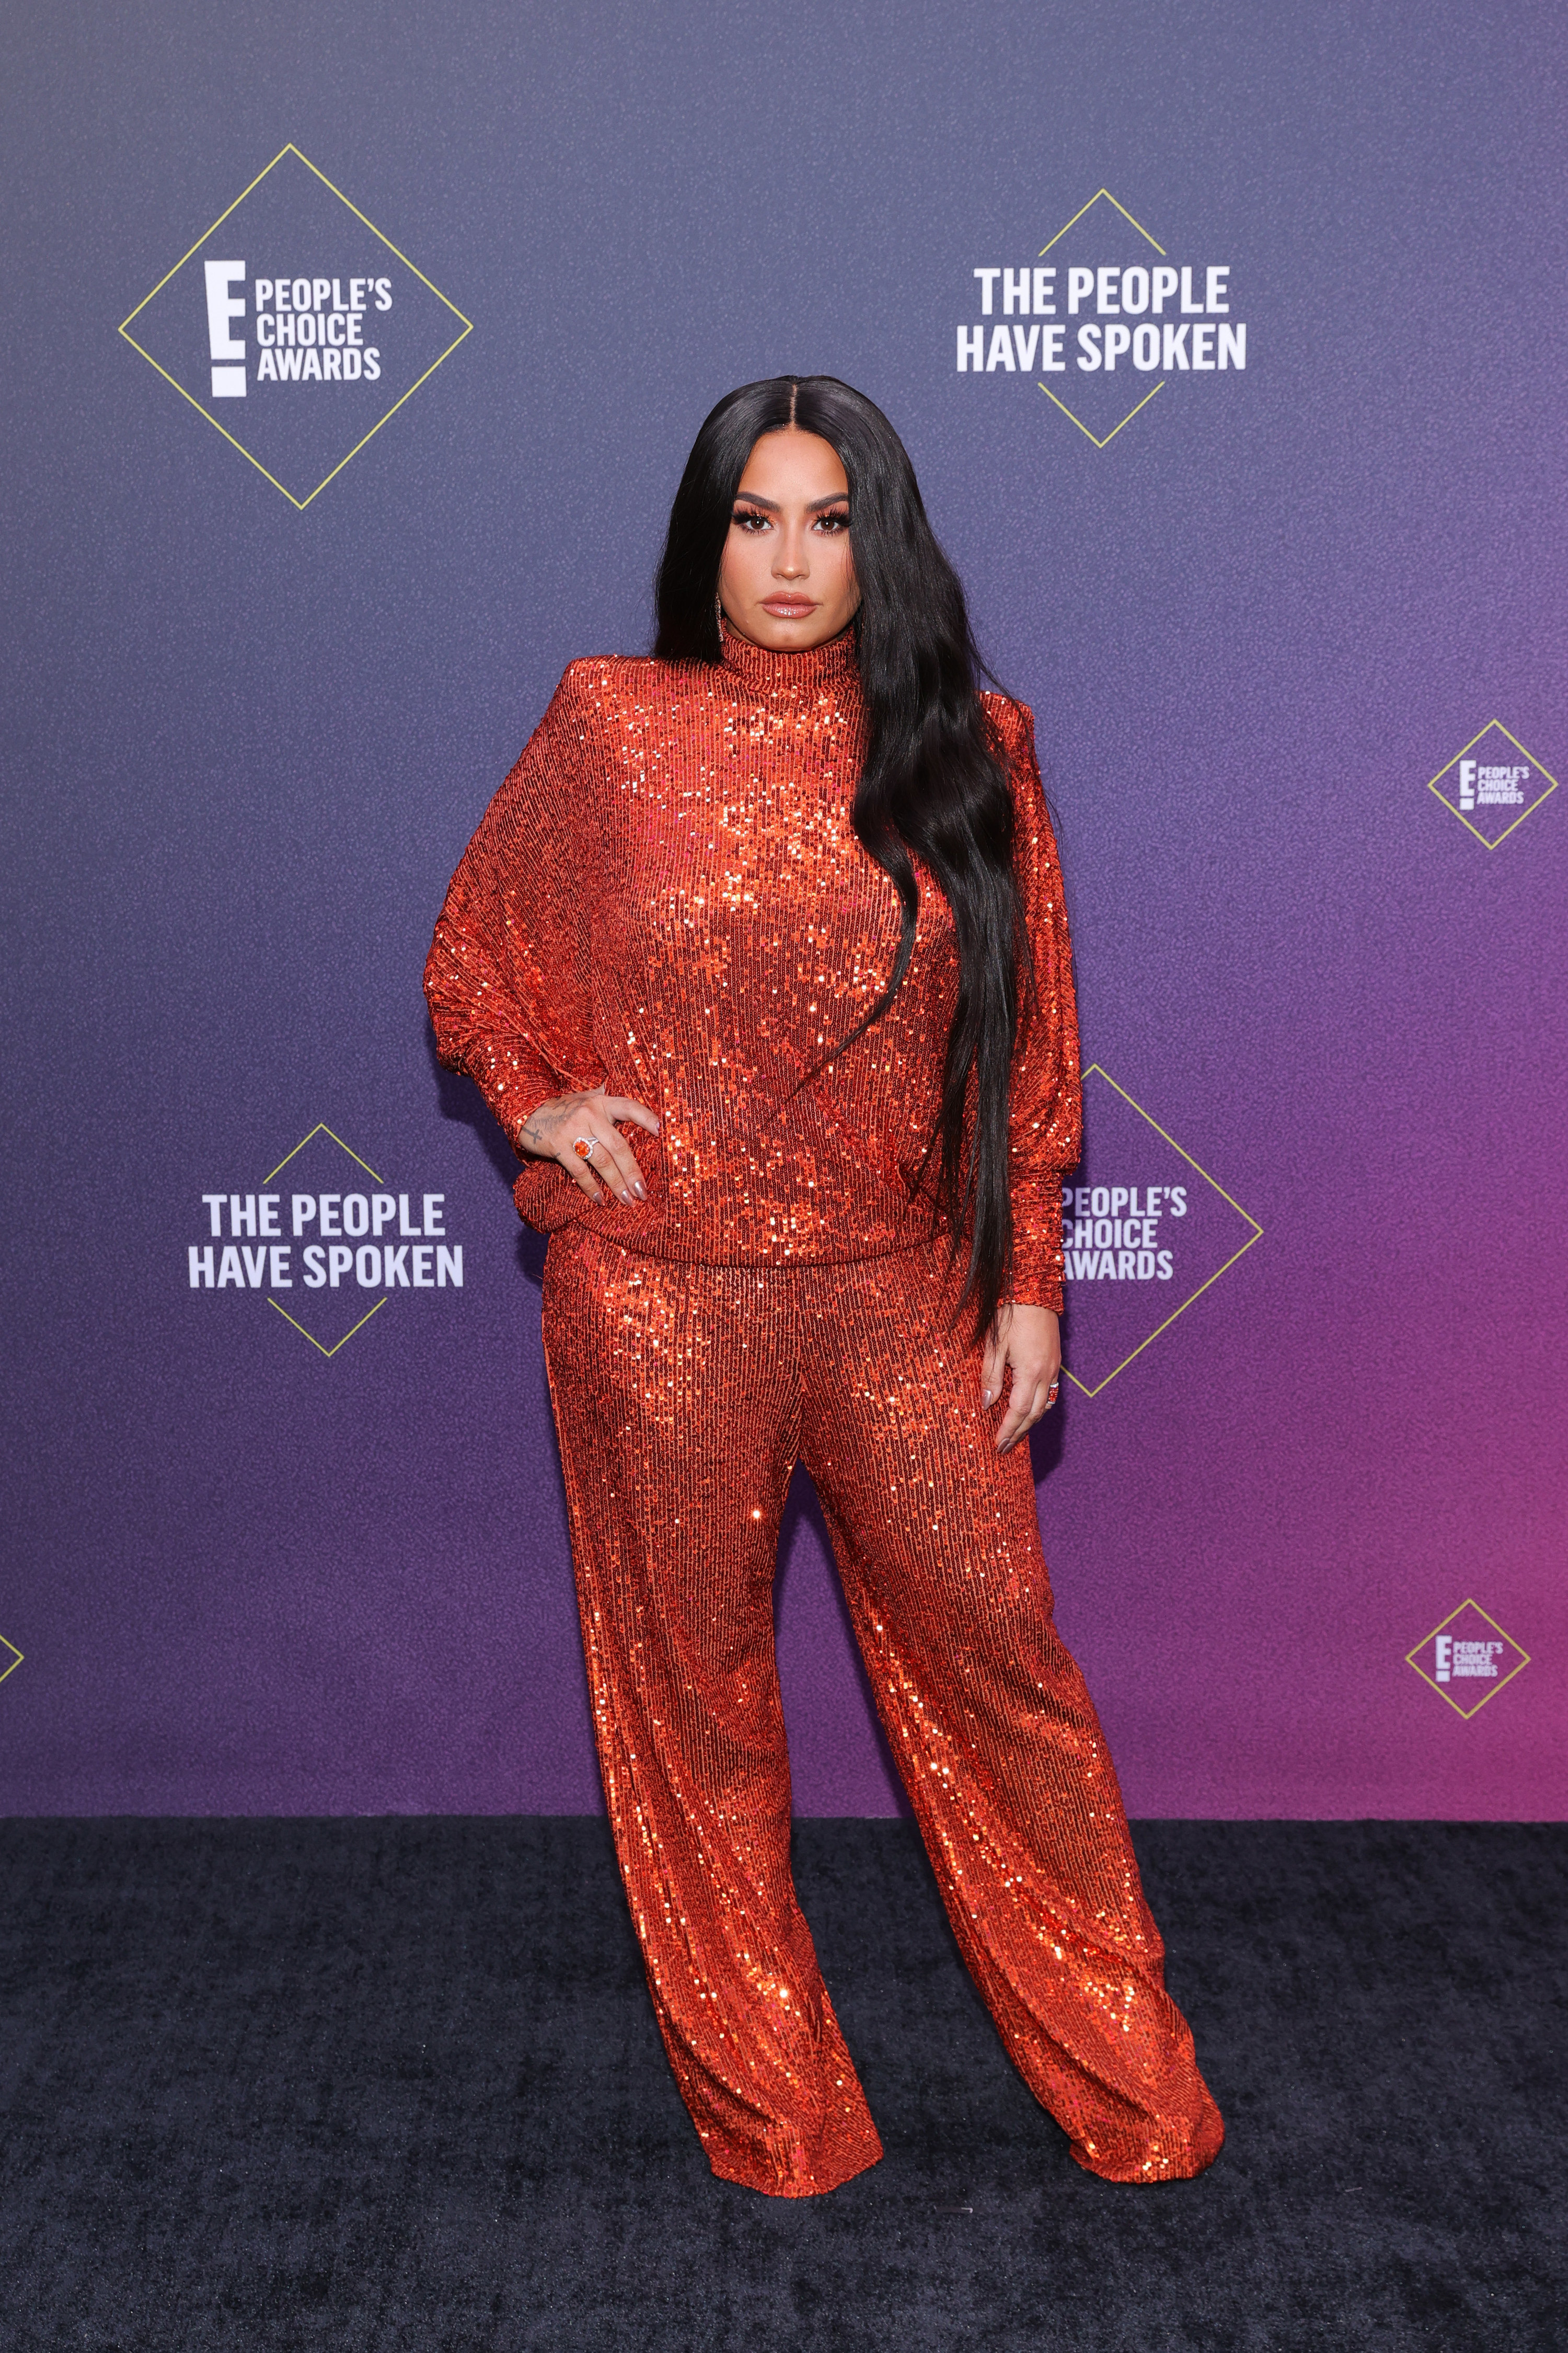 Demi posing for photographers at an event in a sequined jumpsuit and rocking long hair